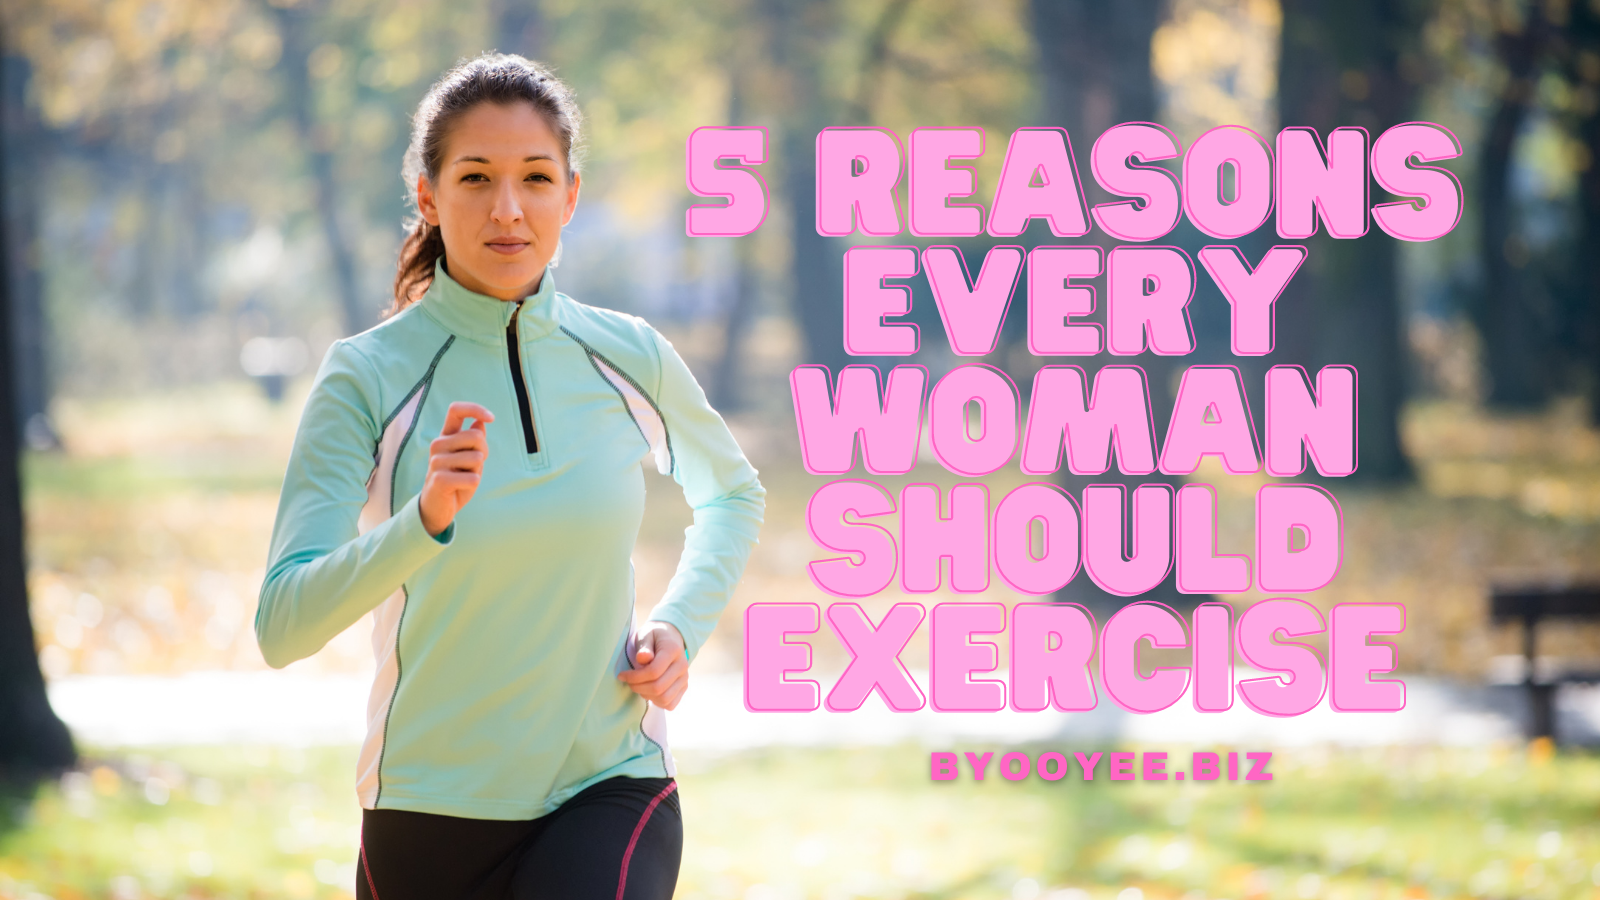 5 Reasons Every Woman Should Exercise